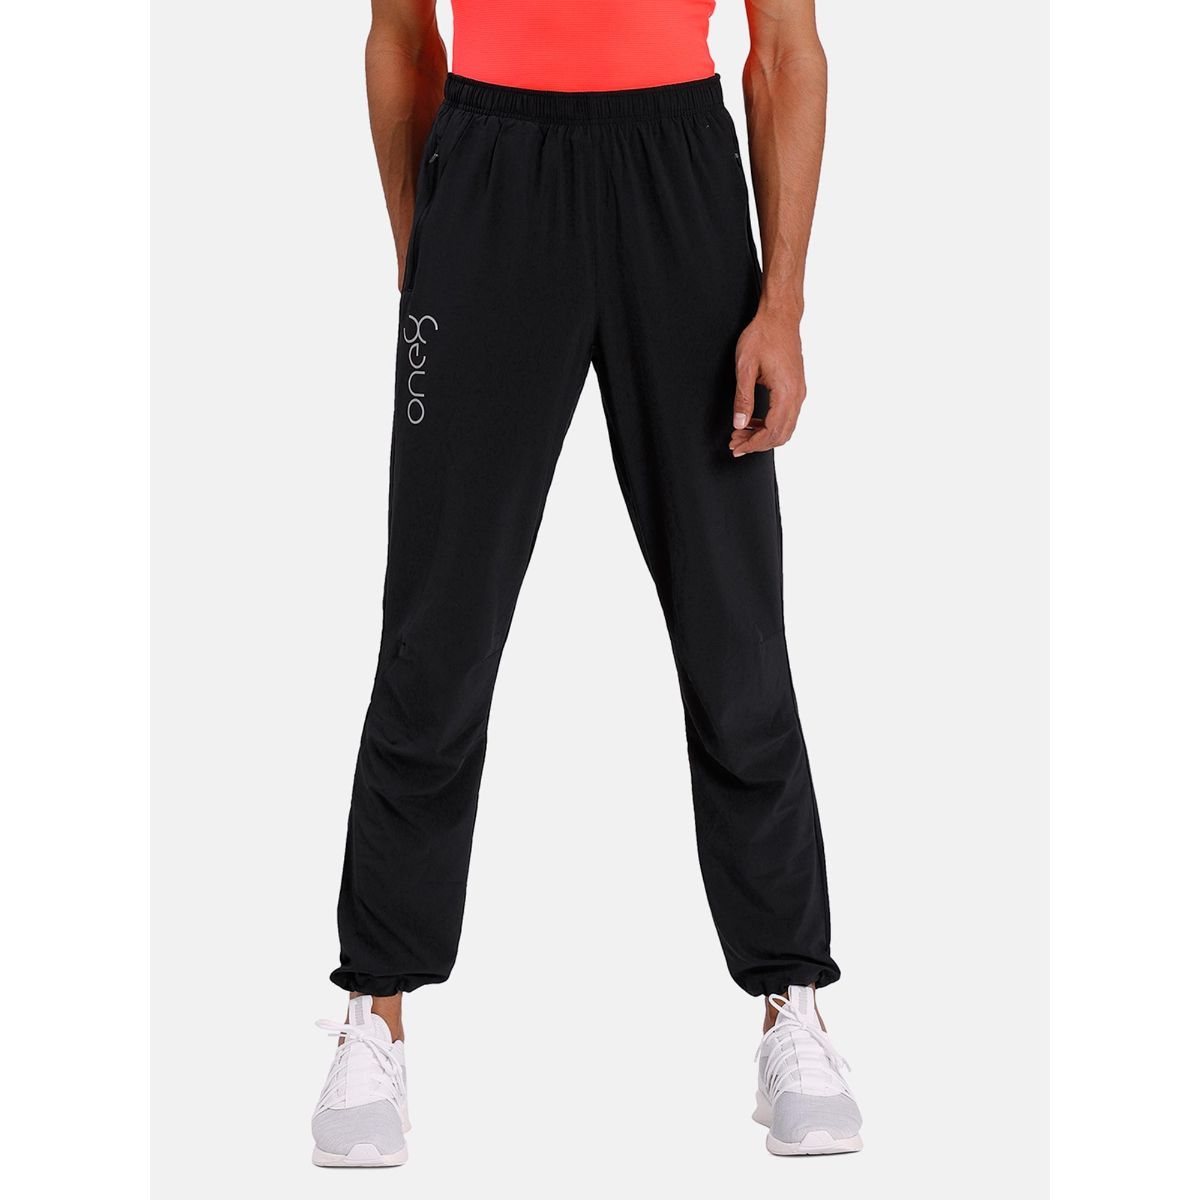 one8 track pants Trending Running,Sportsware,slim-fit Trackpants for man